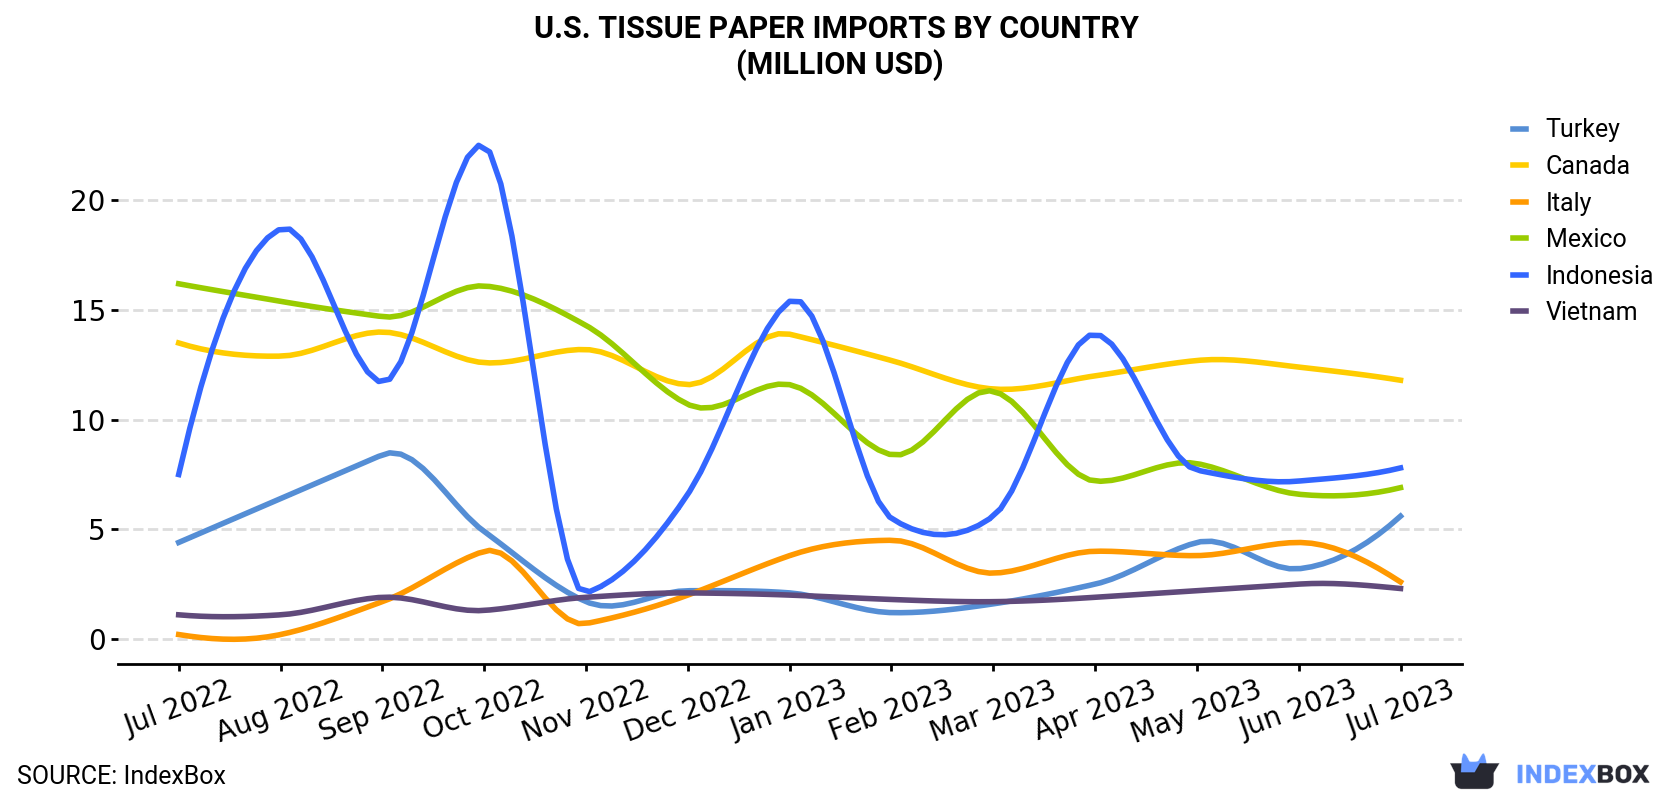 U.S. Tissue Paper Imports By Country (Million USD)